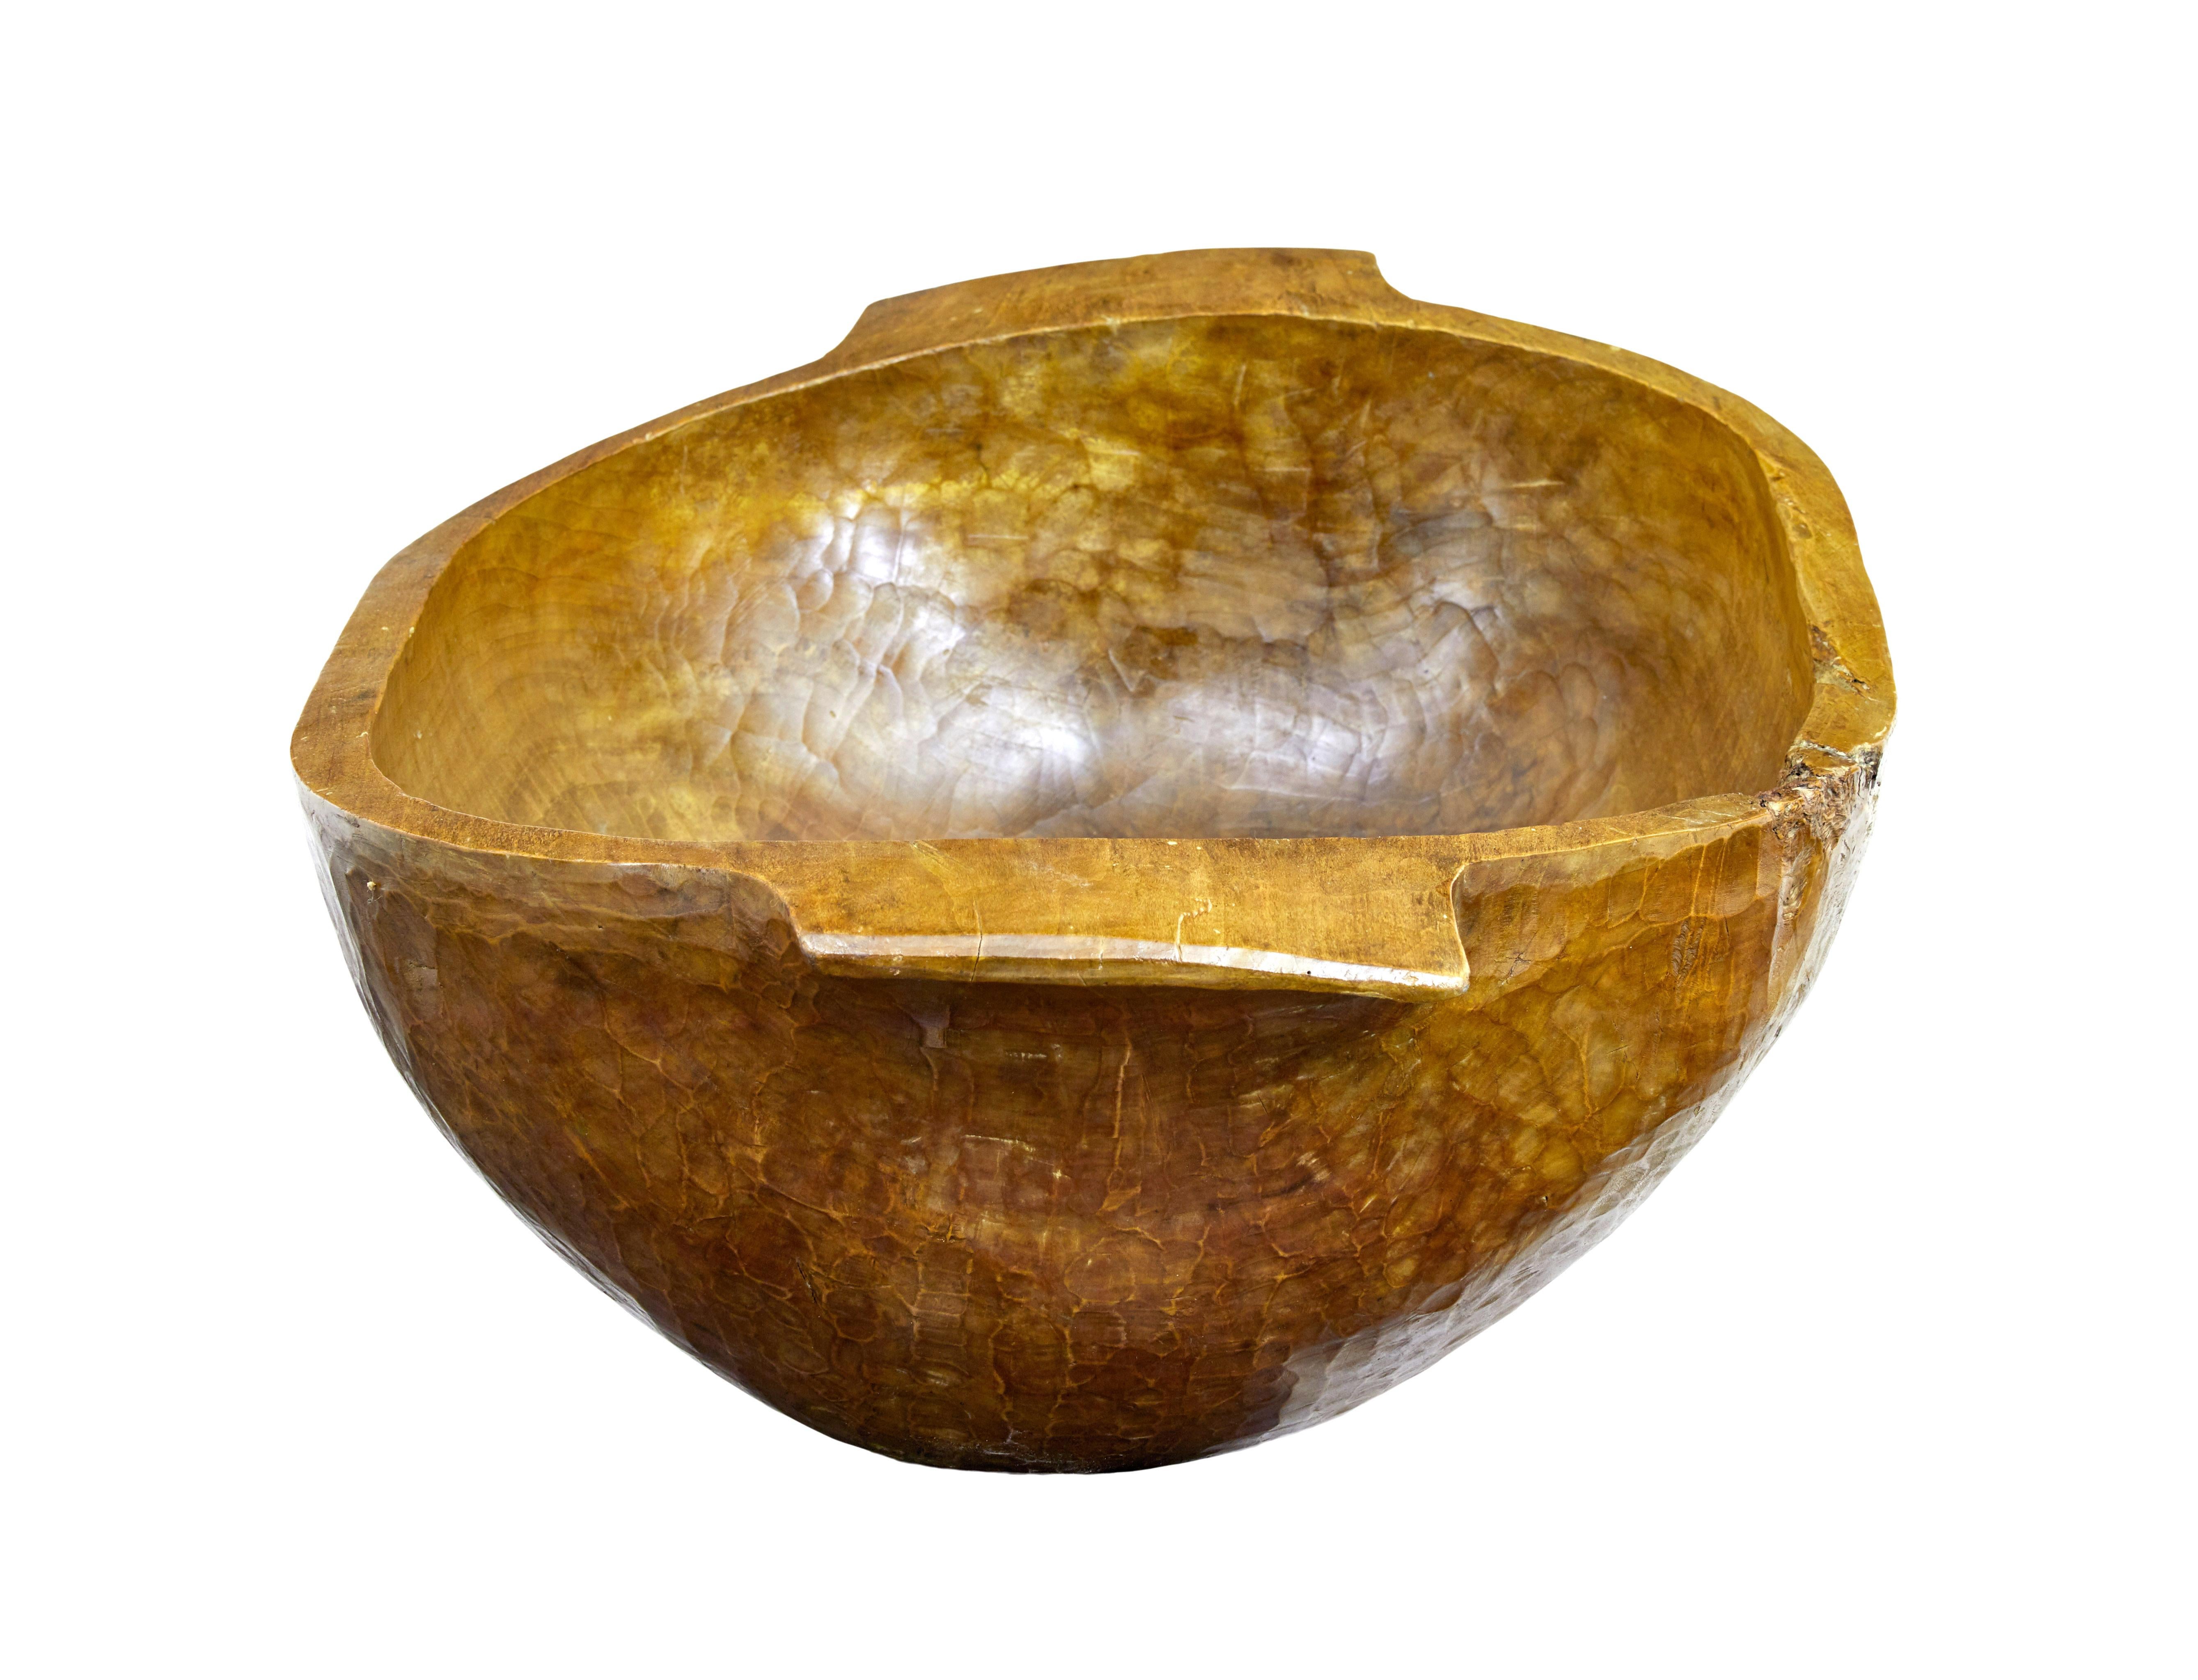 Hand polished large early 20th century carved bowl circa 1900.

Handmade from carving from a solid tree trunk. These were made in eastern Europe as a way of feeding livestock. Due to the condition of this example there's no evidence it got used